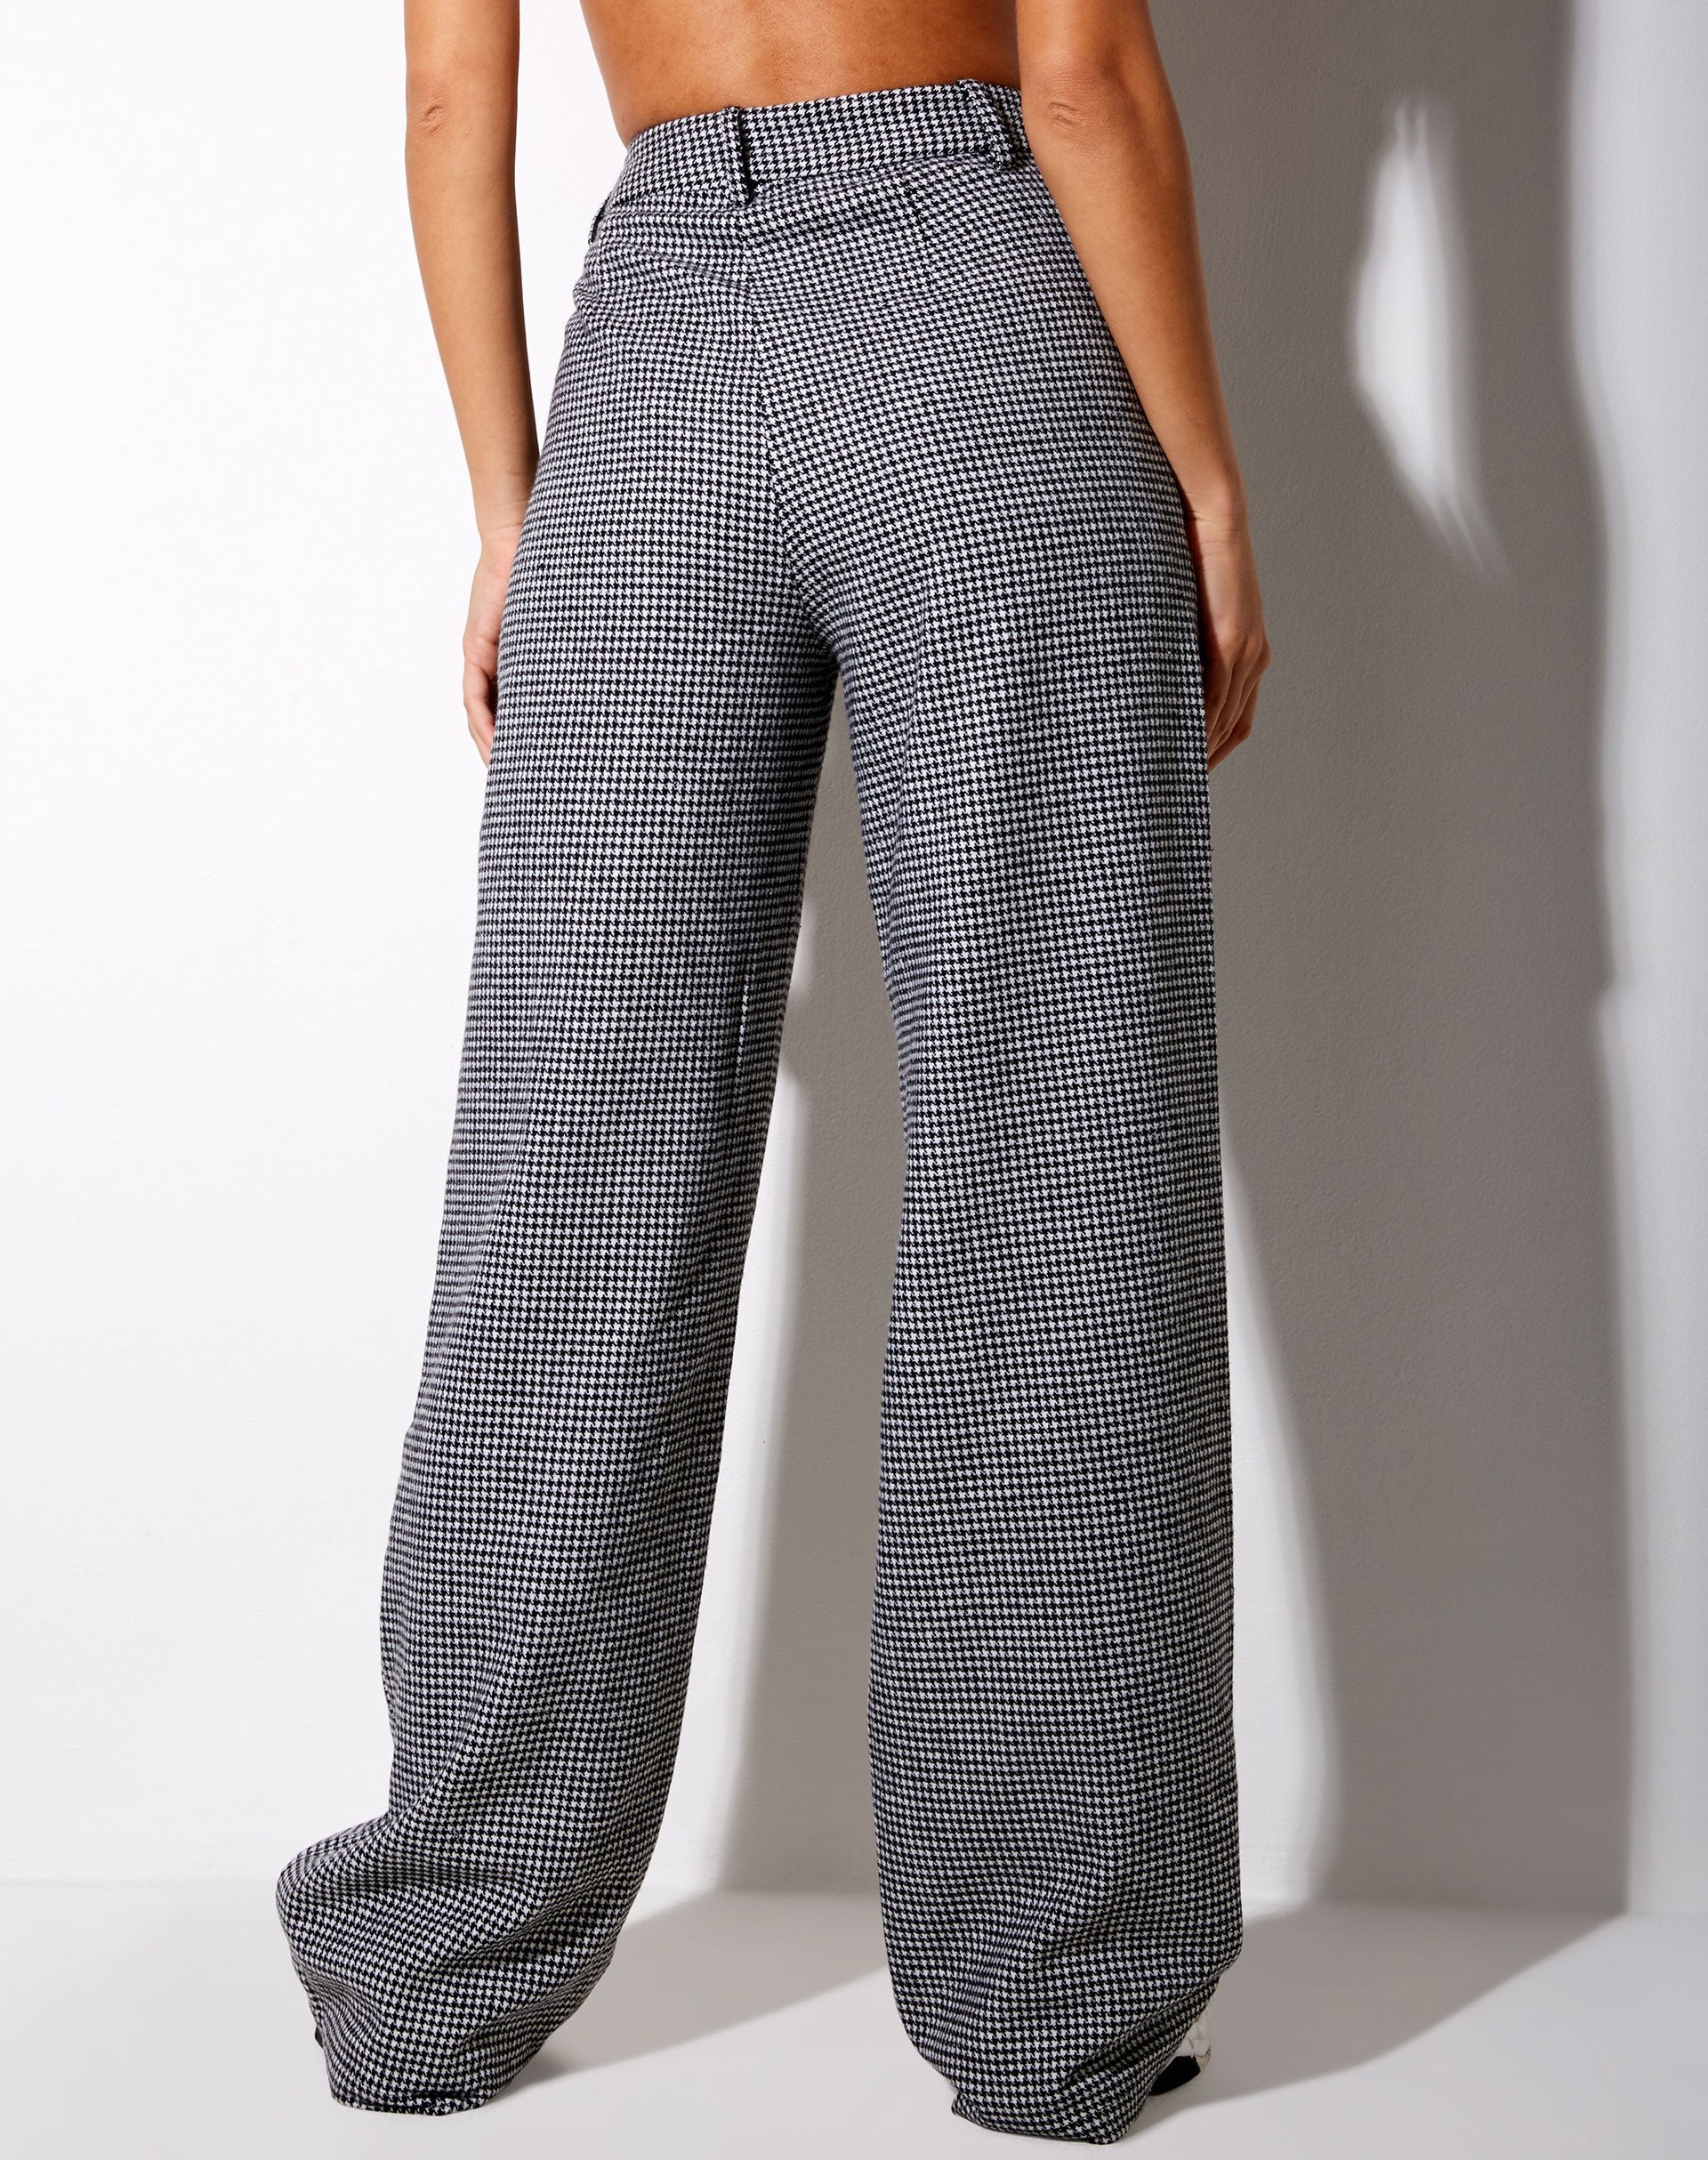 Image of Natania Trouser in Dogtooth Black and White